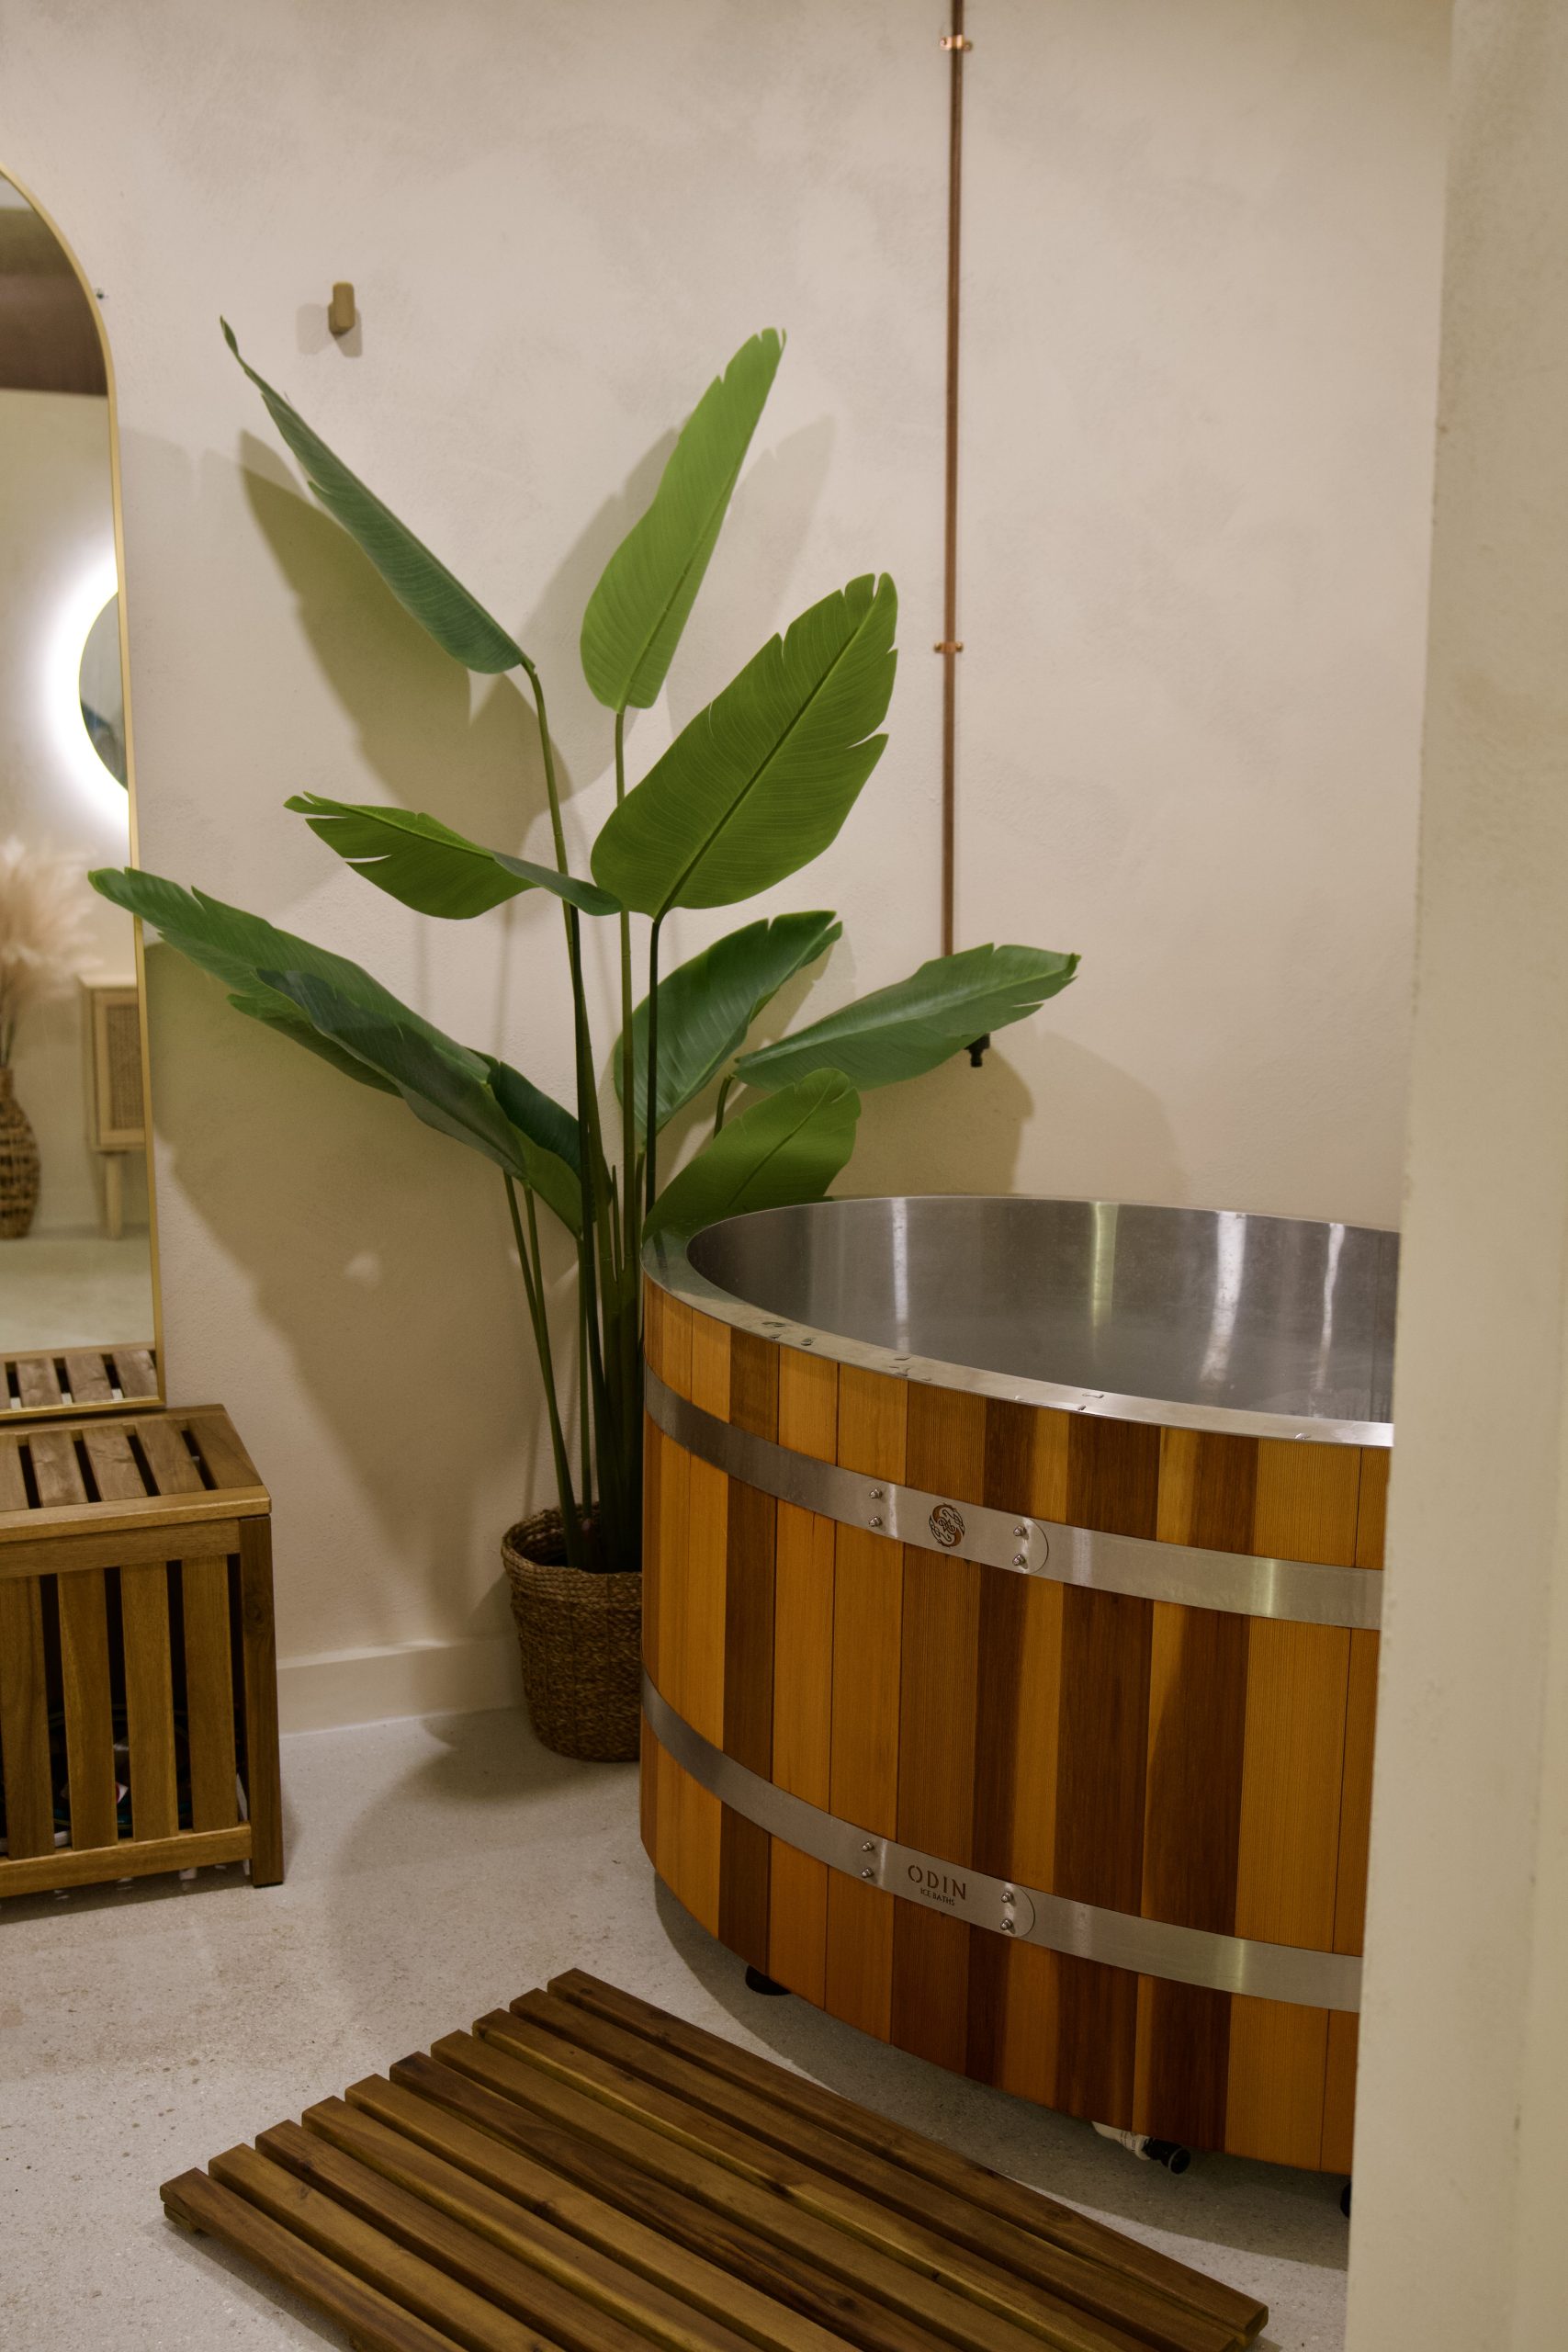 Our Movement Spa has a true ice bath that can be cooled all the way to ZERO degrees and is Ozone & UV filtered for complete sanitation & clear water.